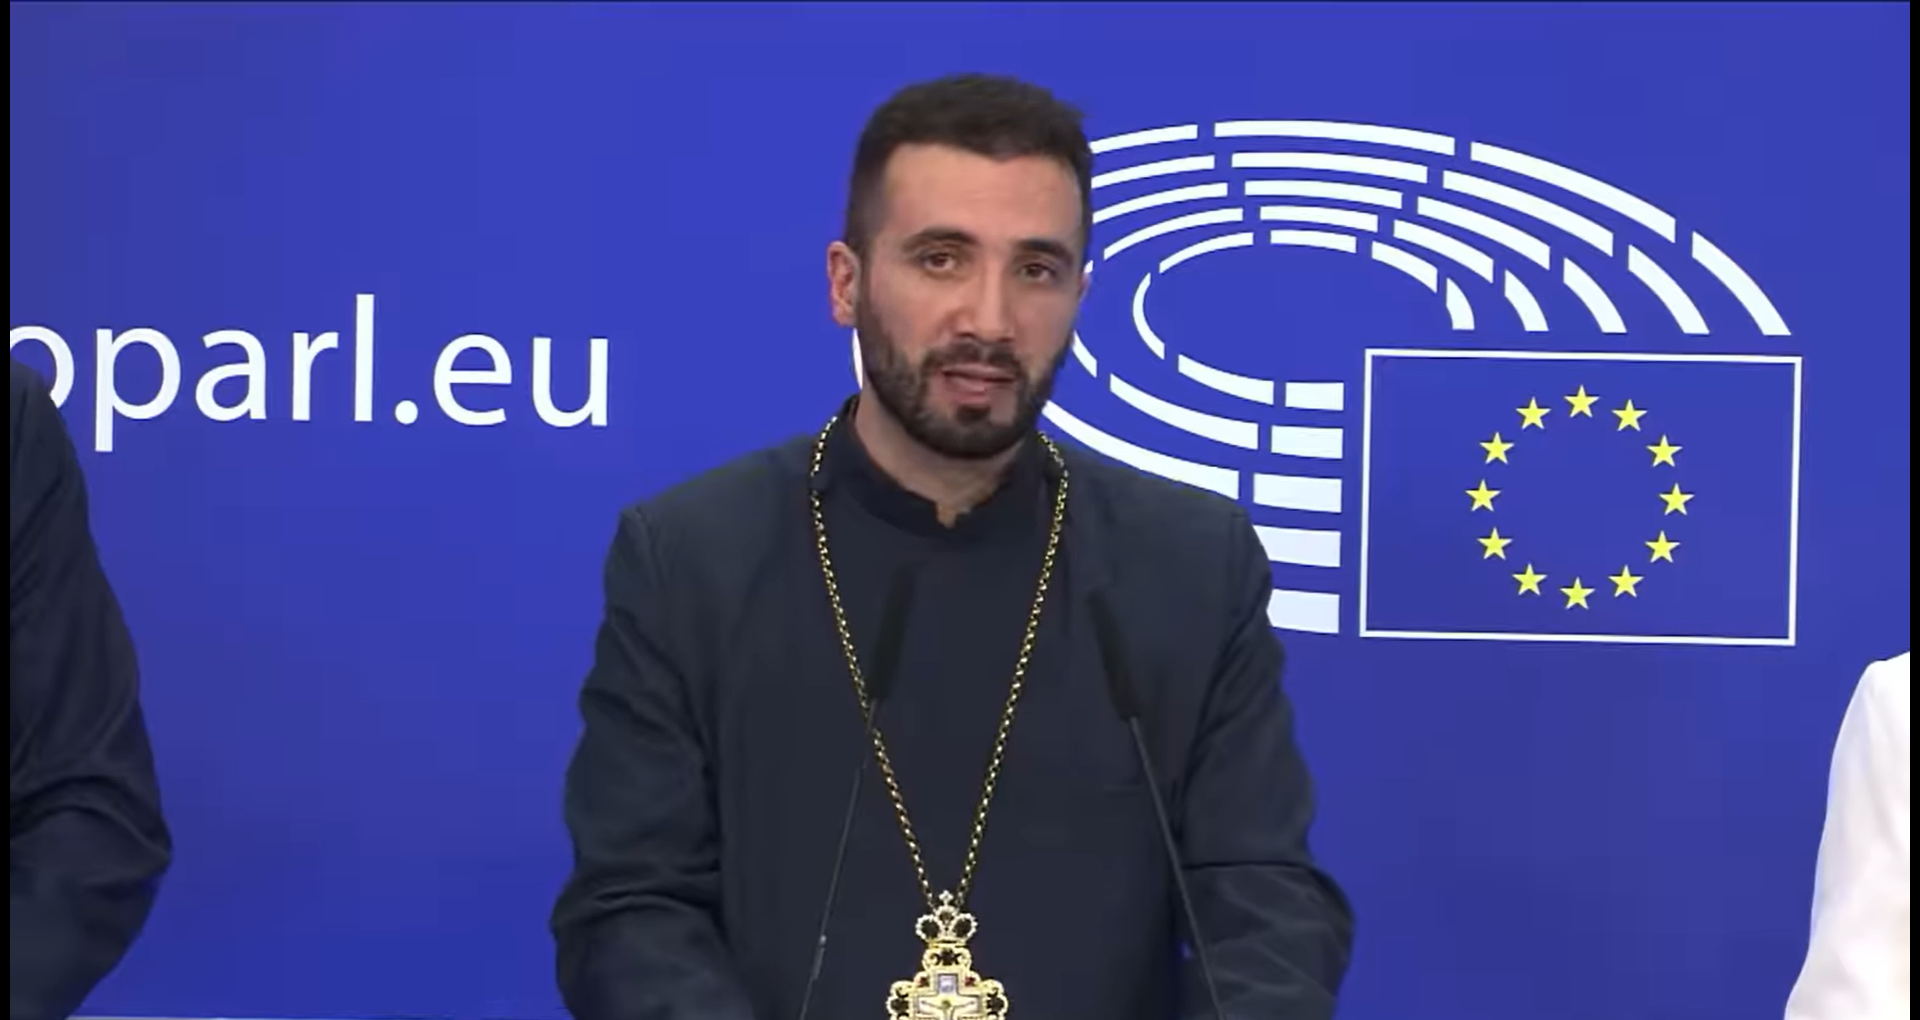 Armenian Cultural Heritage in Nagorno-Karabakh Under Threat: EU Conference in Brussels Raises Alarms